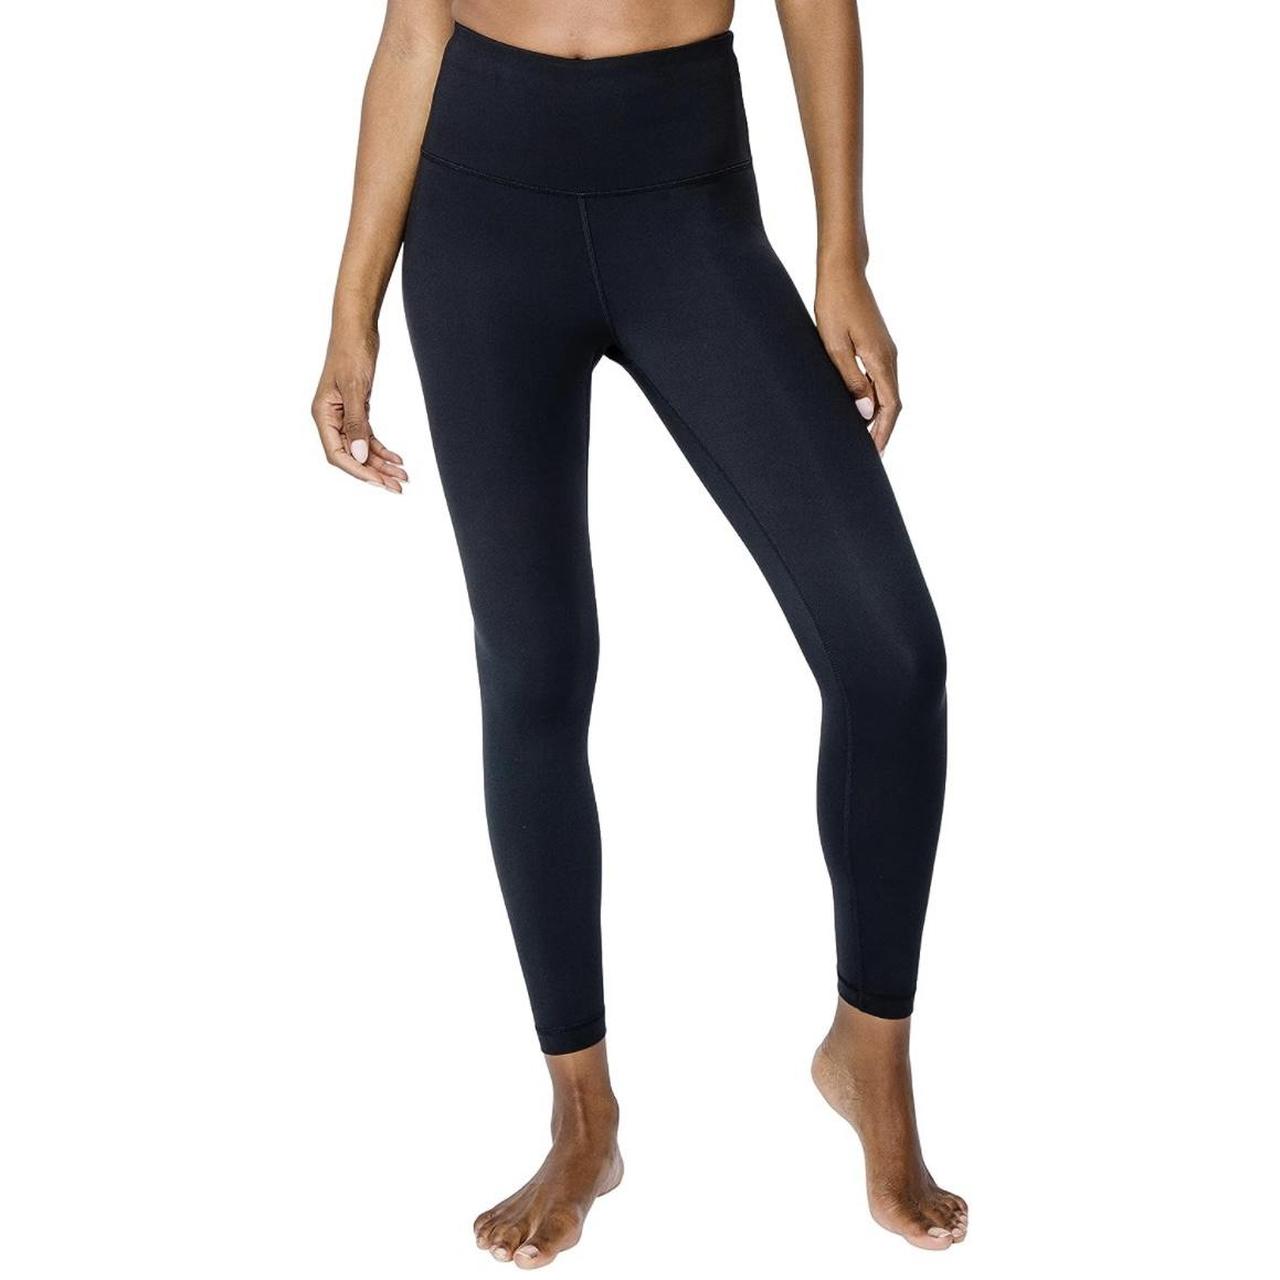 Yogalicious, Pants & Jumpsuits, Yogalicious Lux 78 Tight Marbled Navy  Black